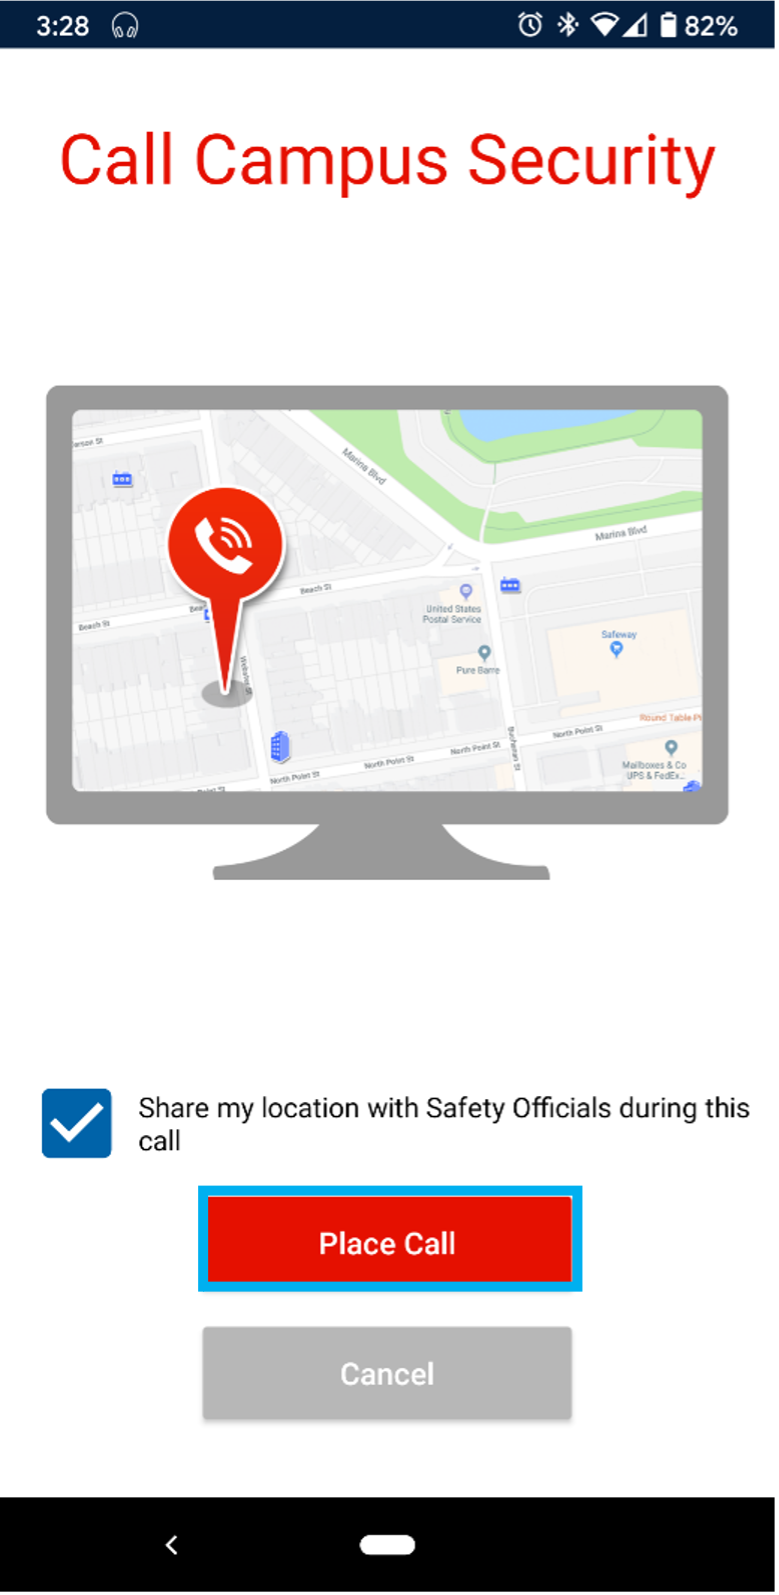 Option to share location with campus security on Guardian app